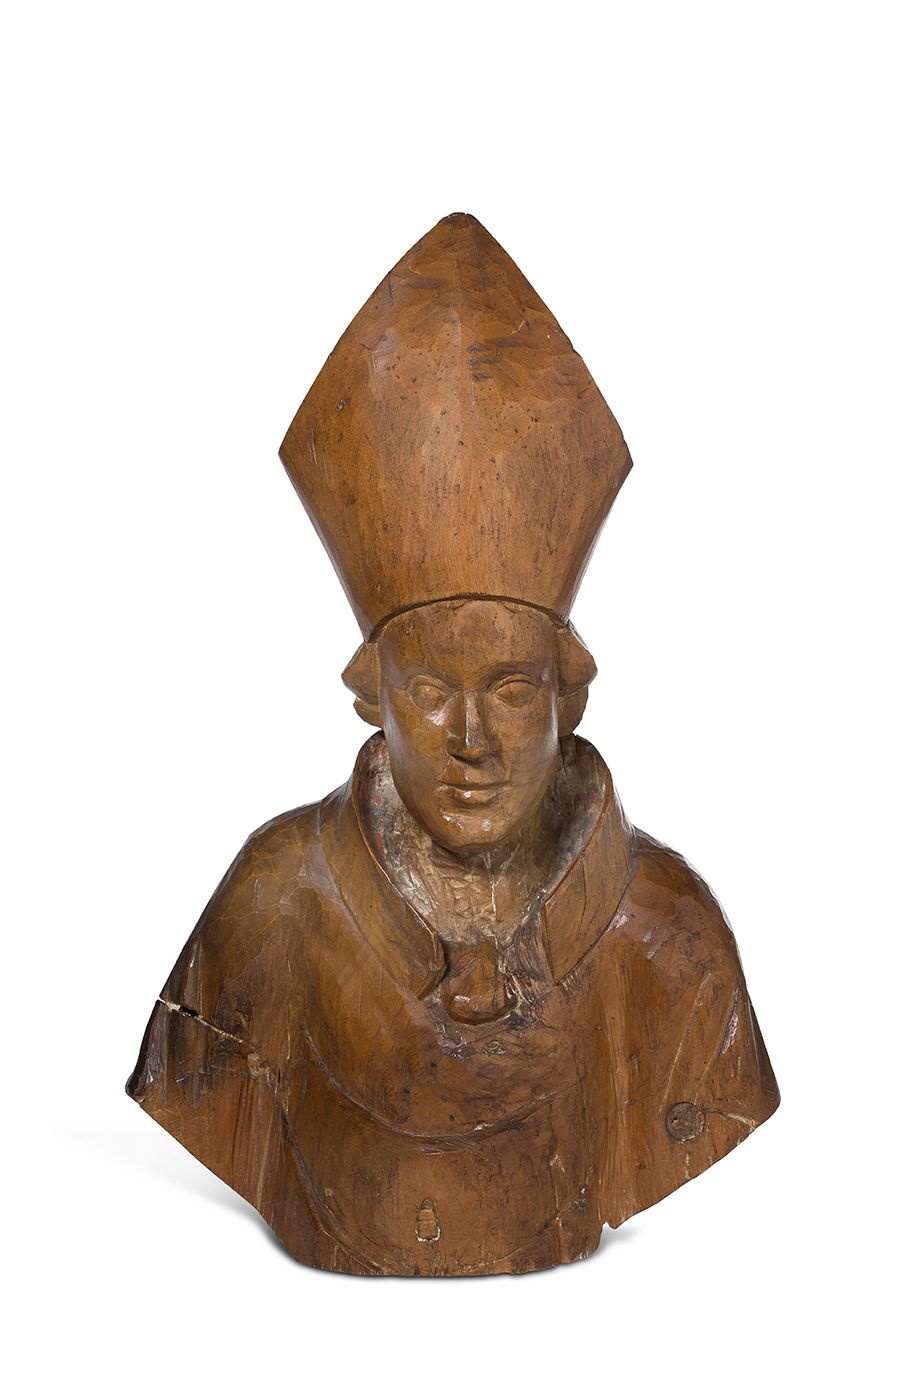 Null BISHOP'S BUST in carved wood, formerly polychrome.
XVIIth century
H. 56 cm
&hellip;